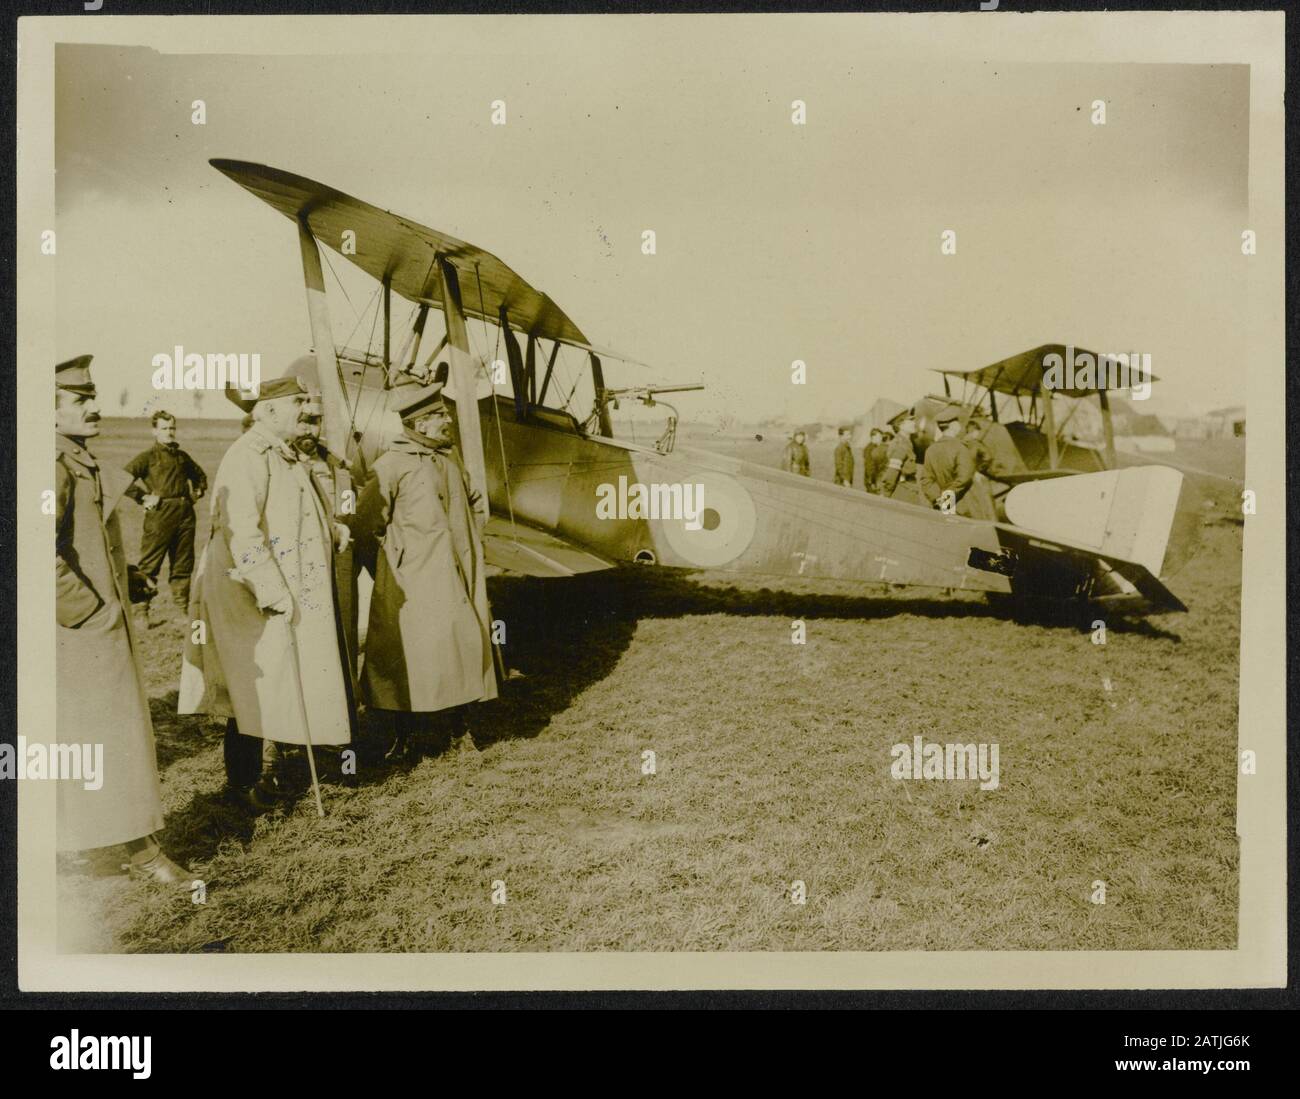 The Western Front Description: H.M. the King of Montenegro watches an airplane fight Annotation: The Western Front. His Majesty King Nikola of Montenegro watching a dogfight Date: {1914-1918} Keywords: WWI, fronts, air battles, dynasties Person Name: Nikola Stock Photo